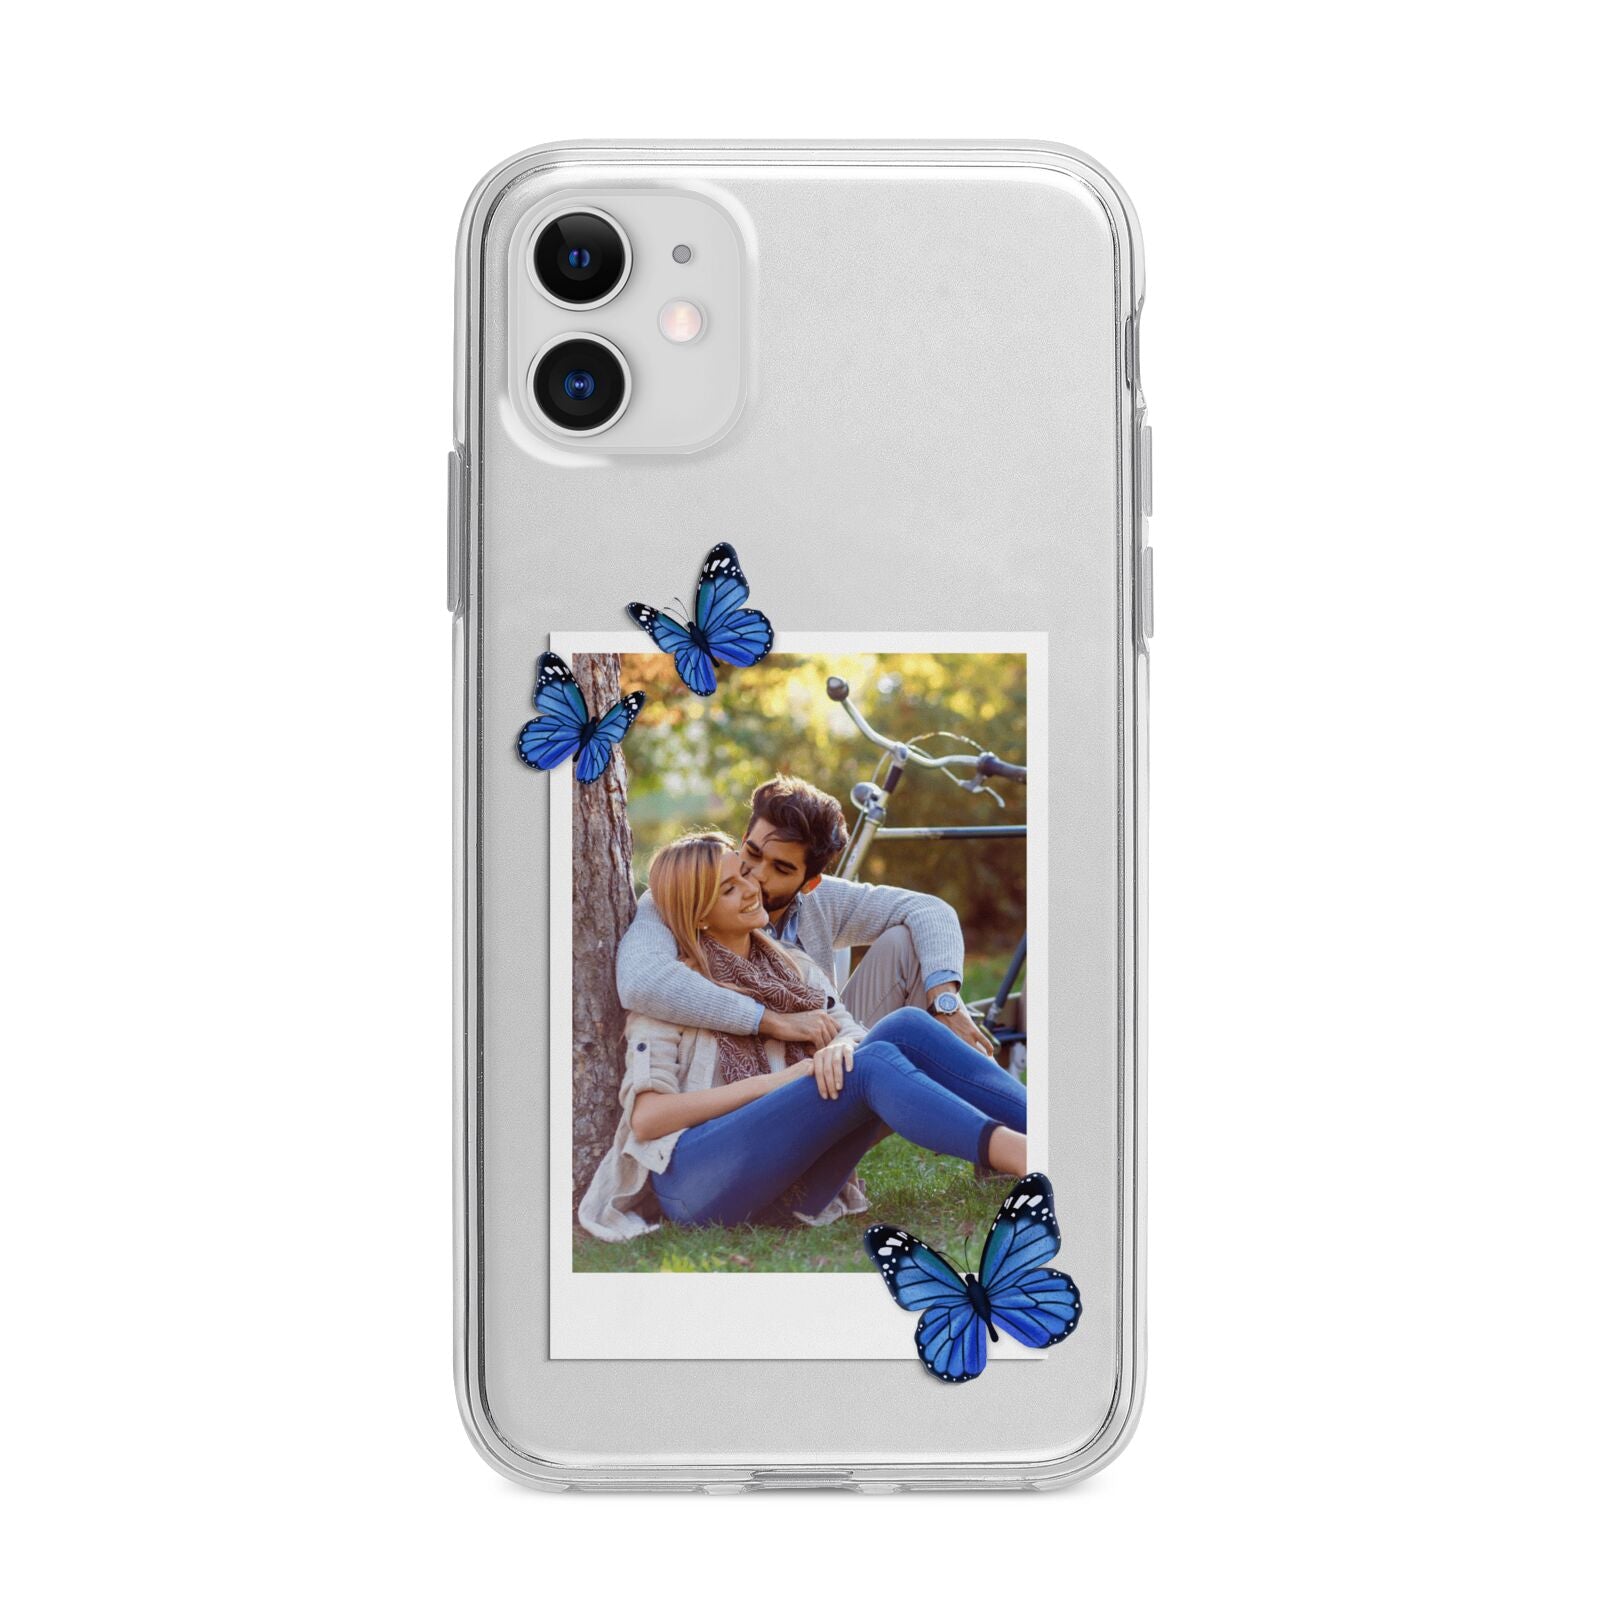 Polaroid Photo Apple iPhone 11 in White with Bumper Case